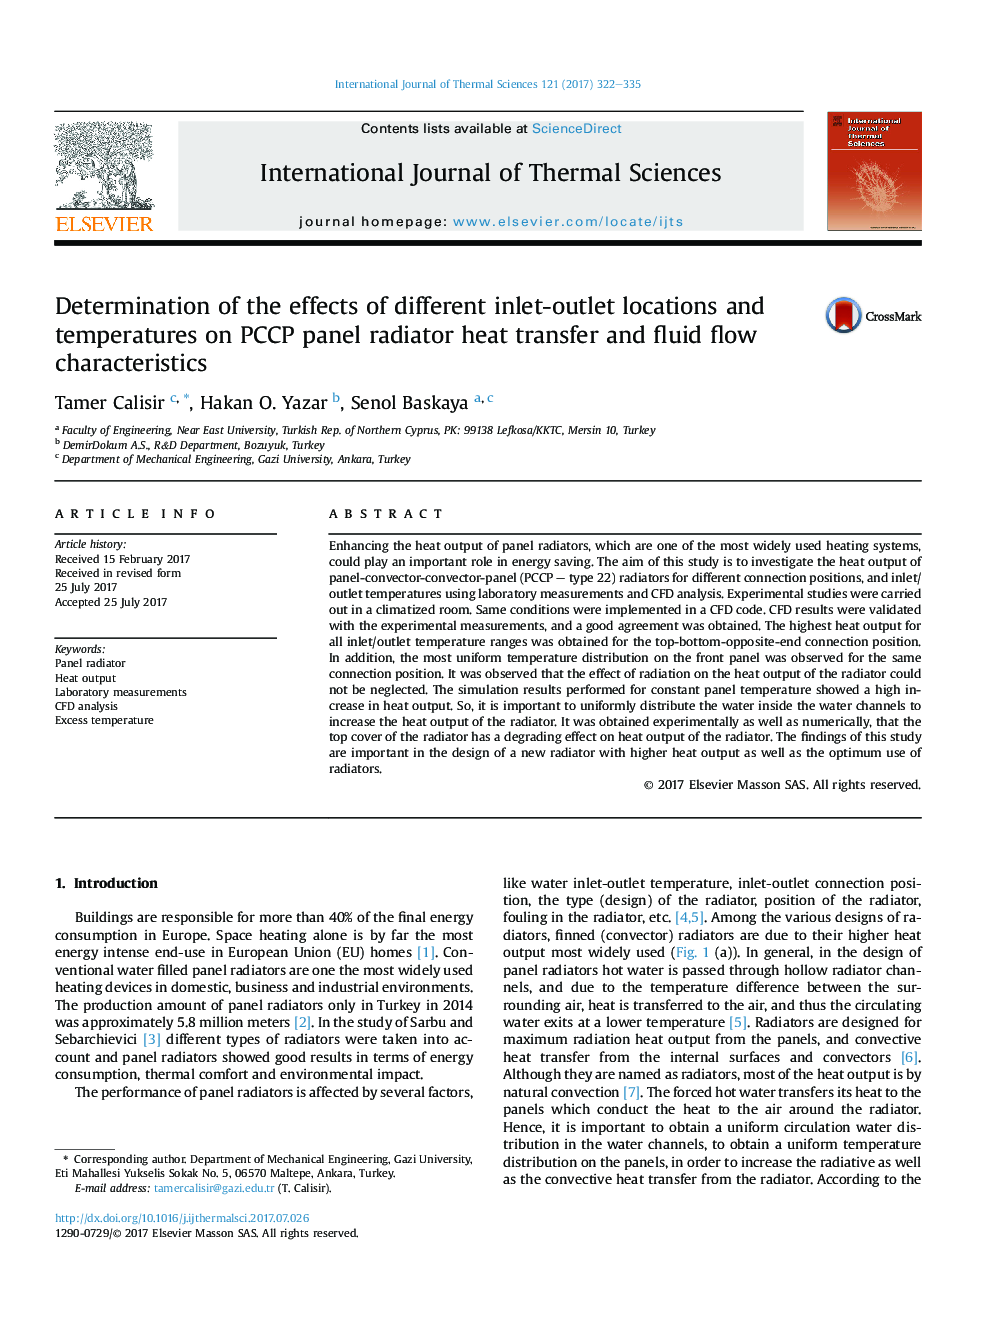 Determination of the effects of different inlet-outlet locations and temperatures on PCCP panel radiator heat transfer and fluid flow characteristics